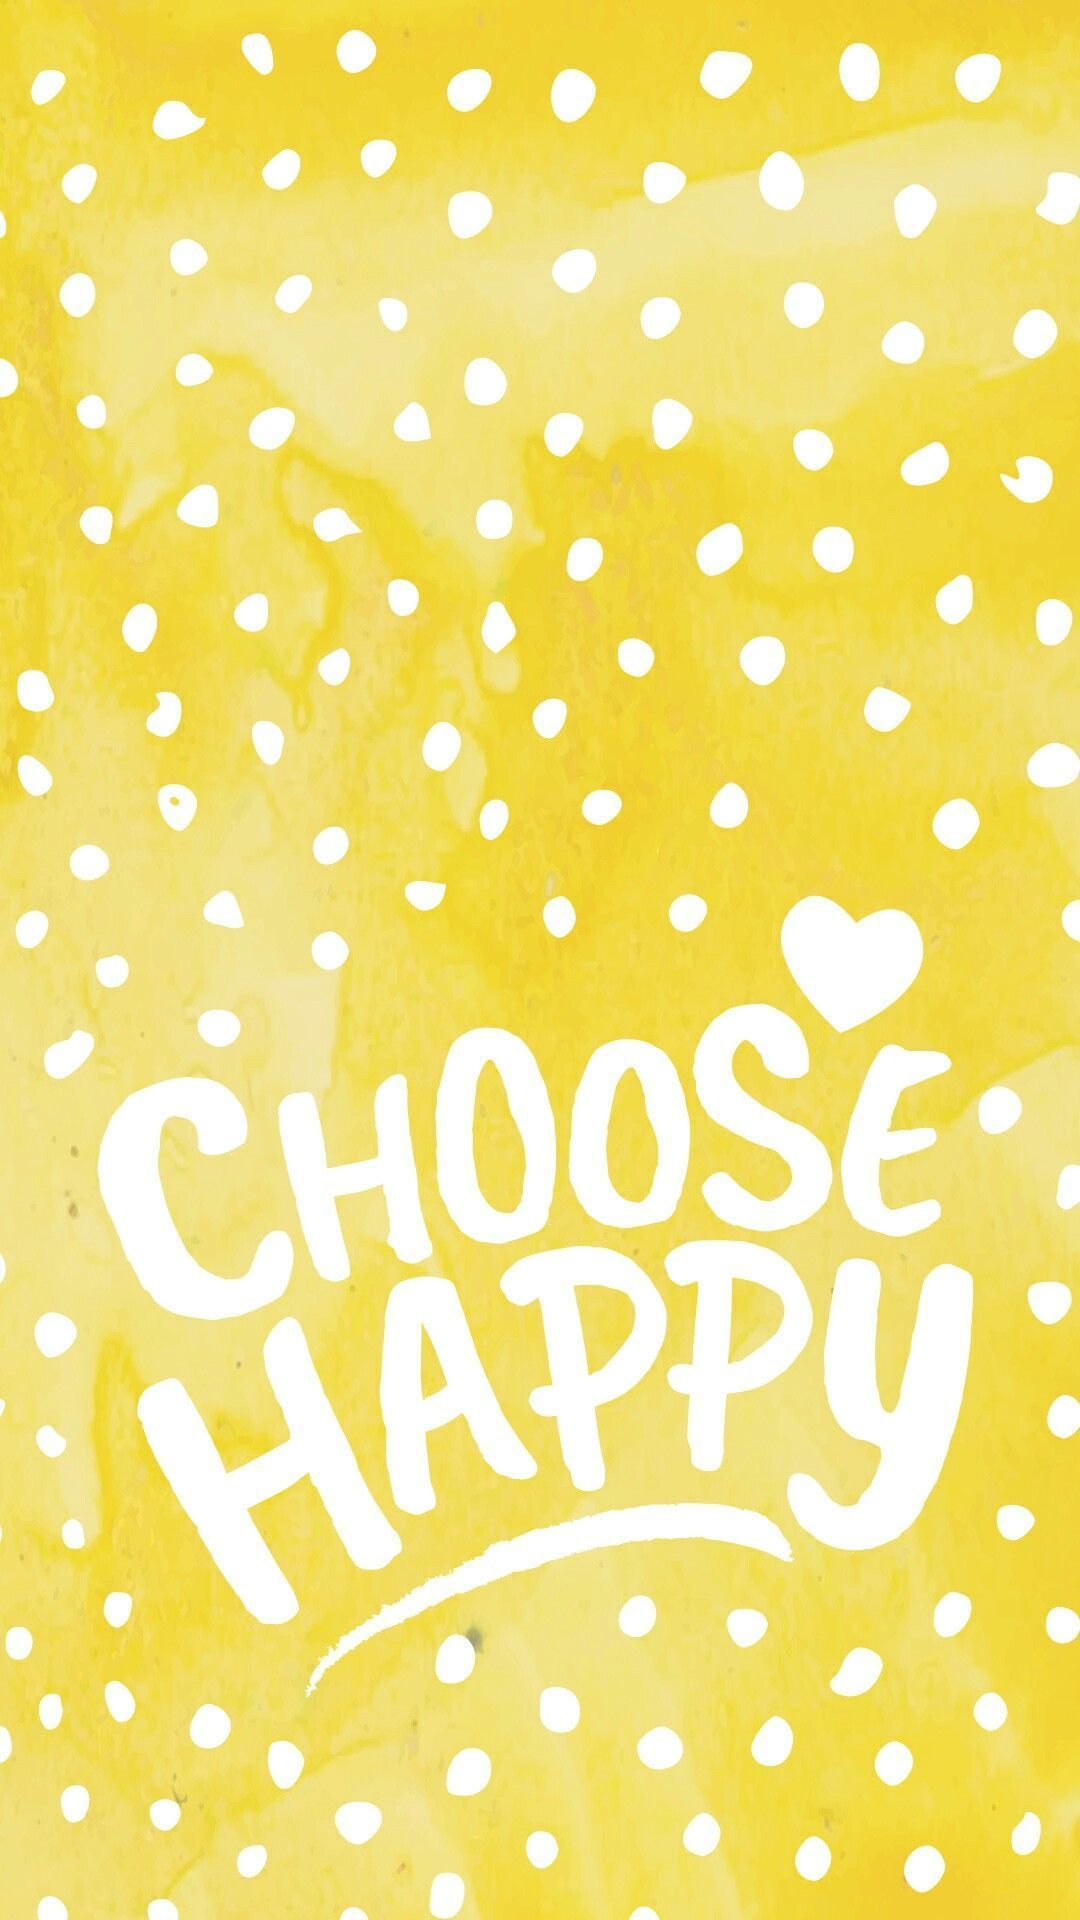 Choose Happy!. Wallpaper quotes, Cute quotes, Colorful wallpaper